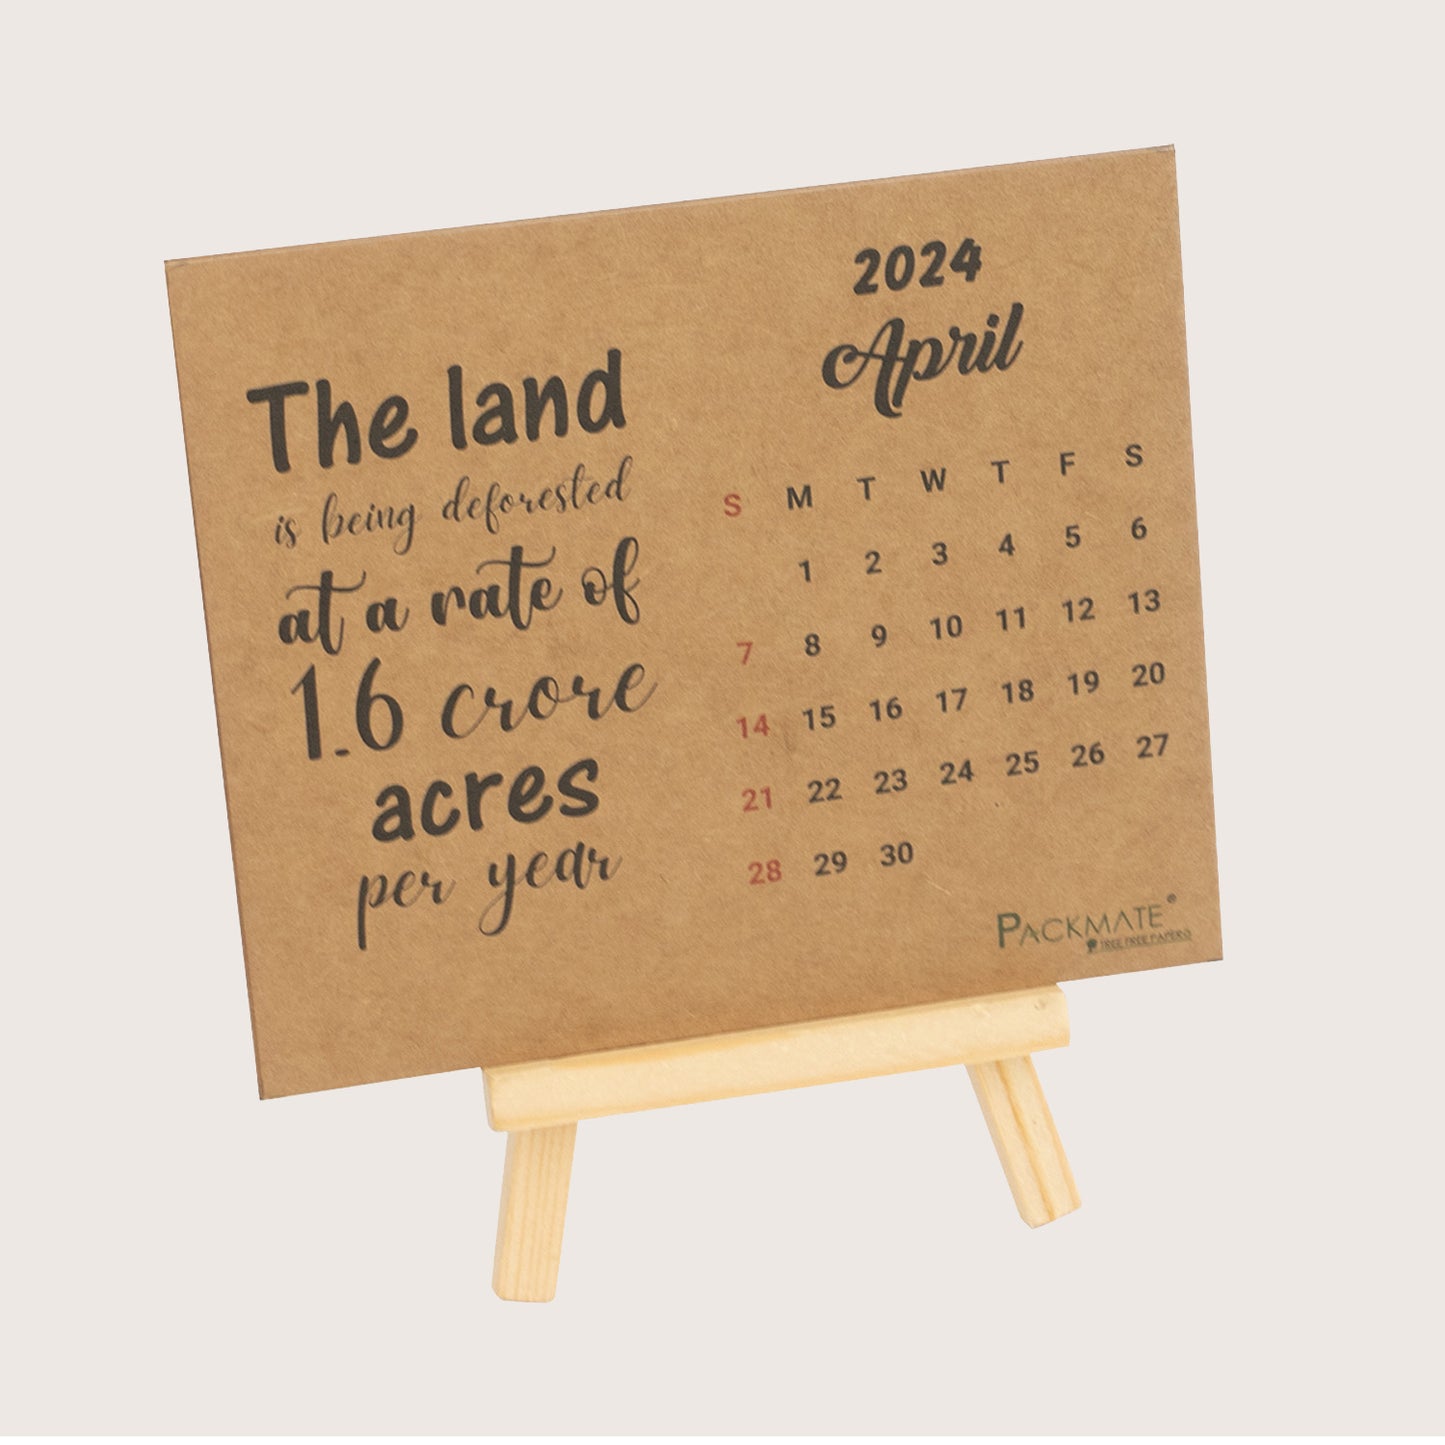 Packmate Calendar (Pack of 2)  Made From 100% Recycled Paper